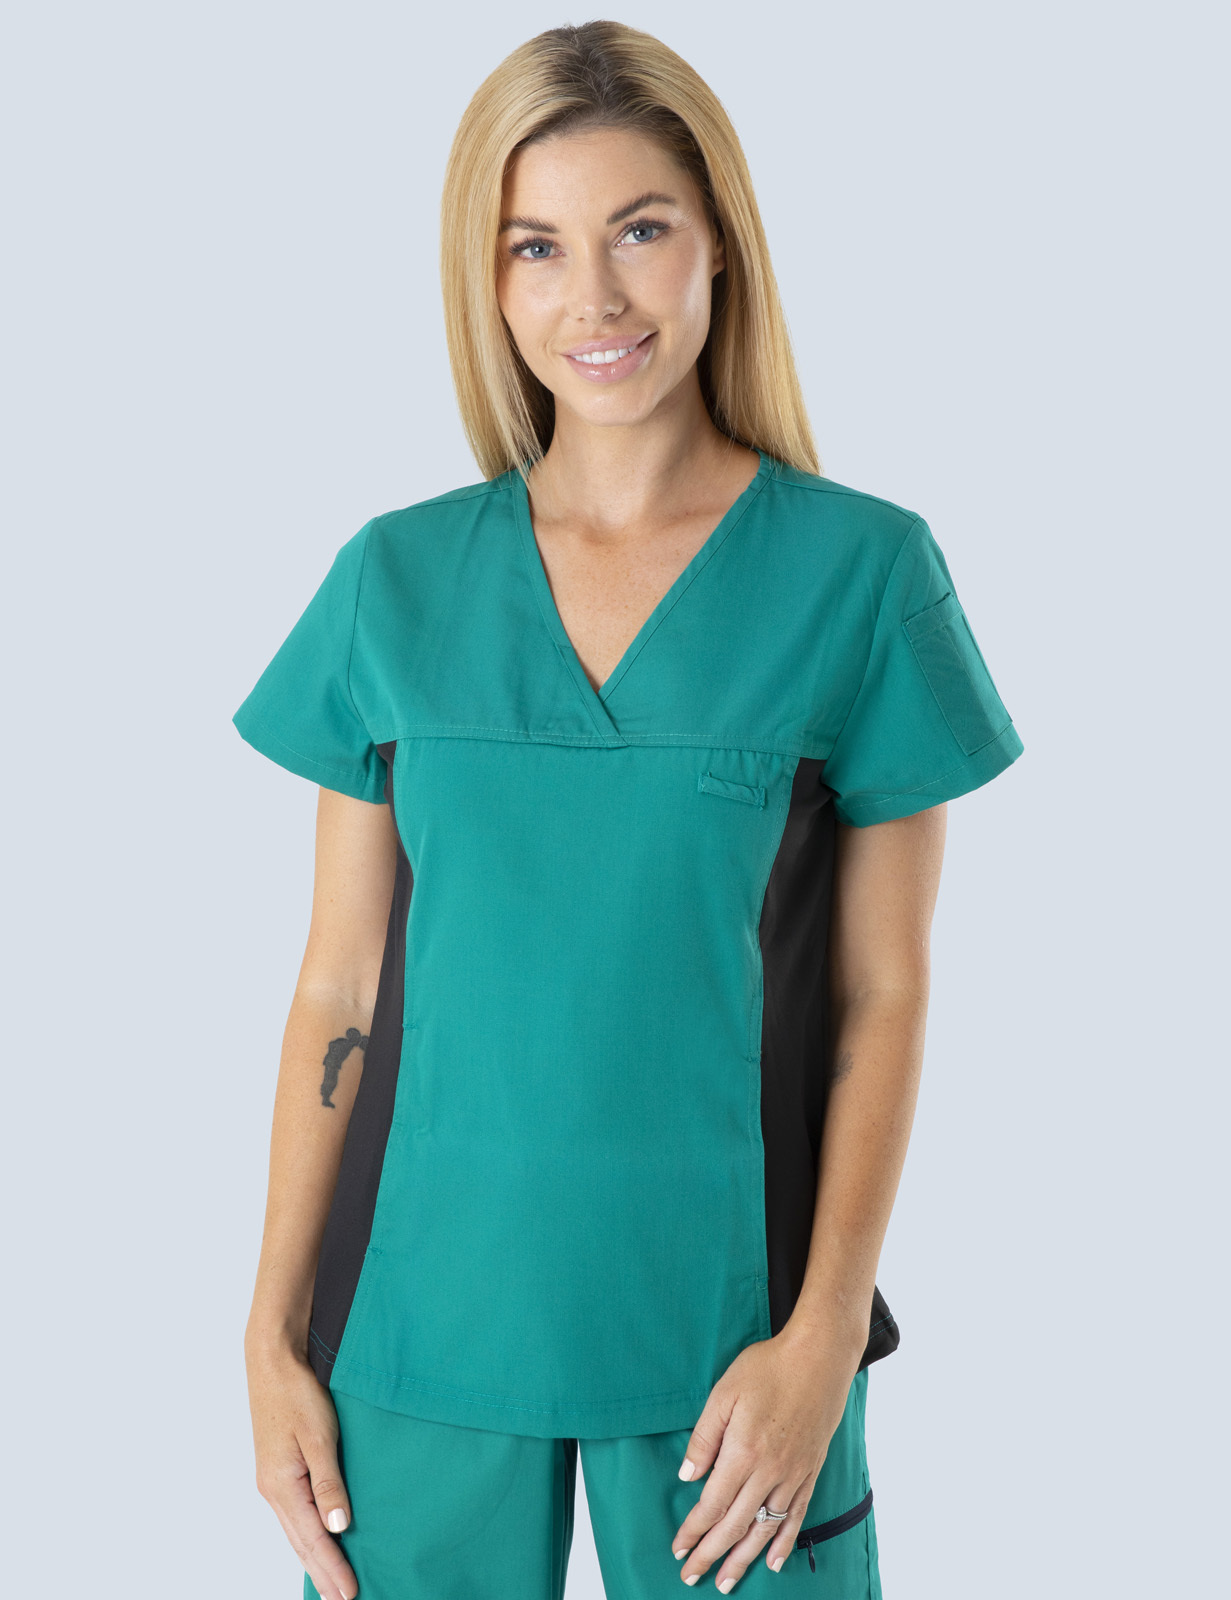 Women's Fit Solid Scrub Top With Spandex Panel - Hunter - X Small